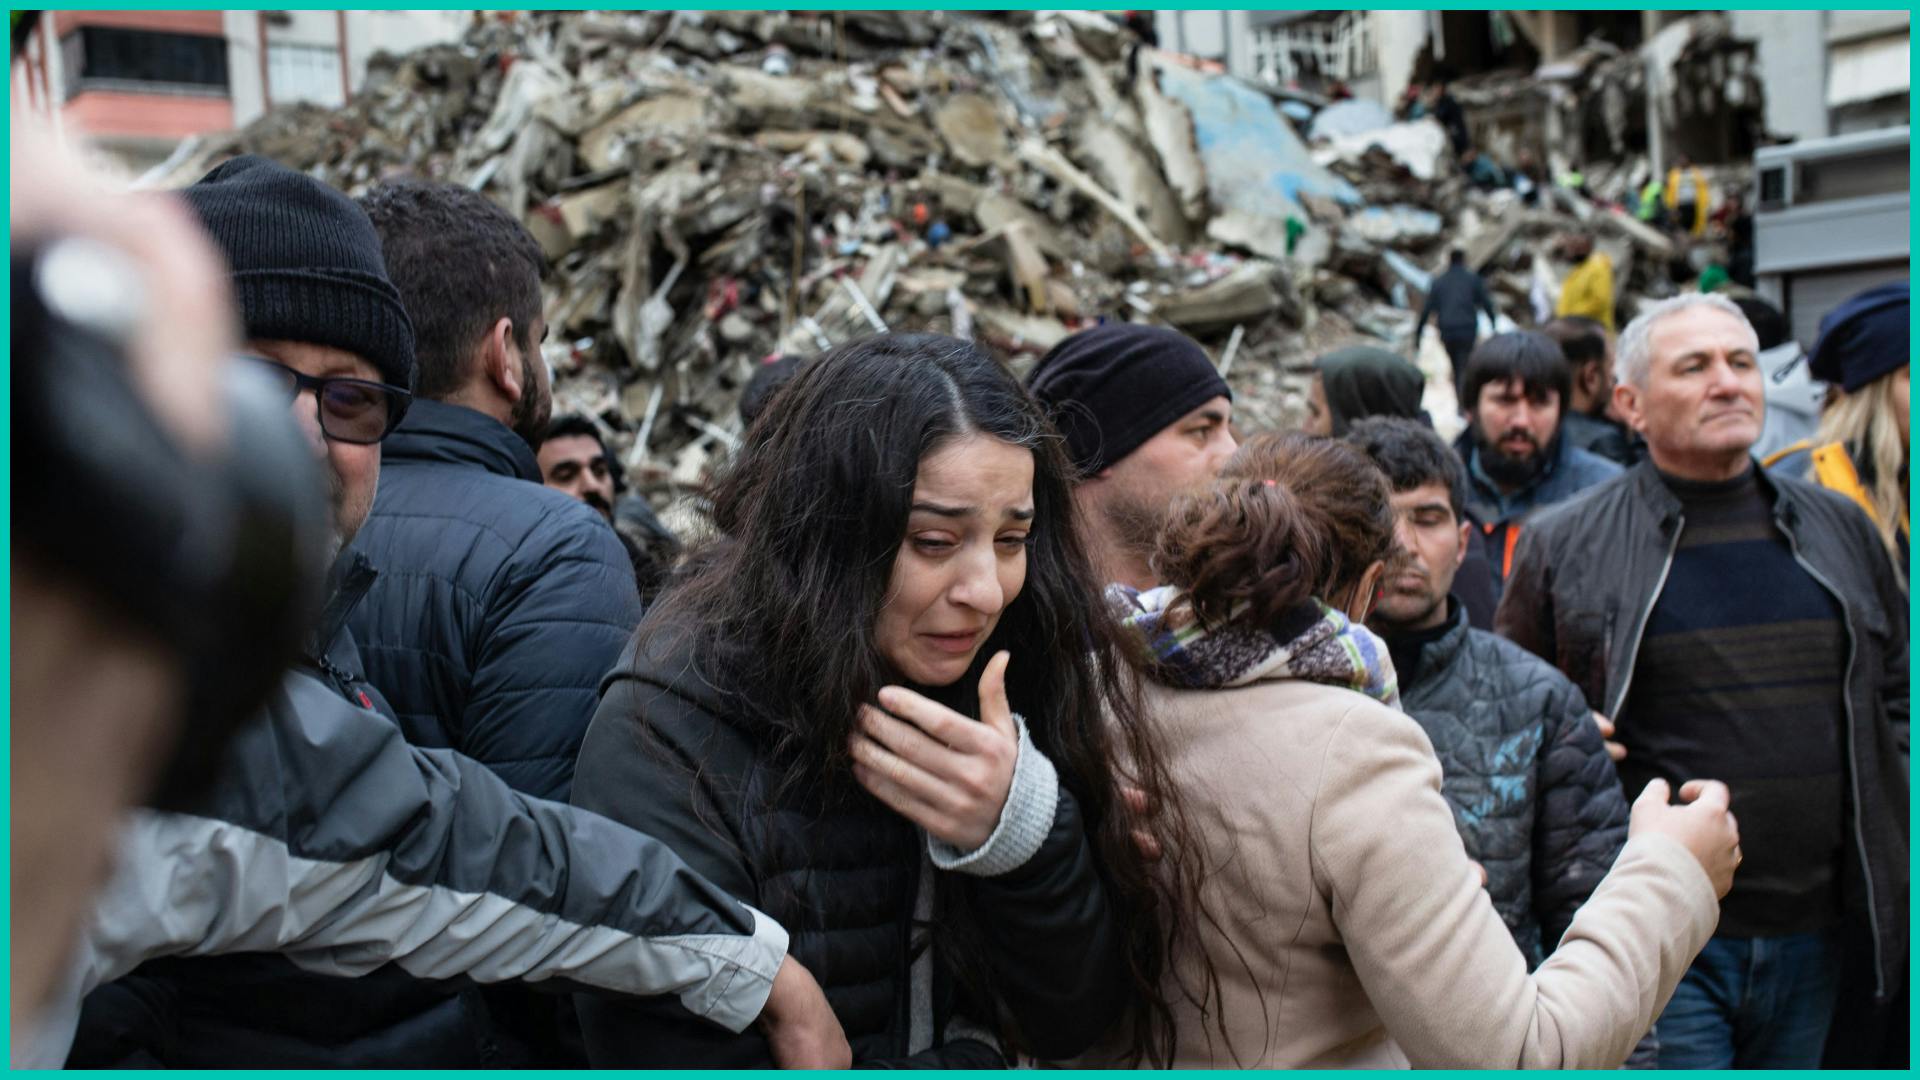 A woman reacts as rescuers search for survivors through the rubble of collapsed buildings in Adana, on February 6, 2023 after a 7,8 magnitude earthquake struck the country's south-east.